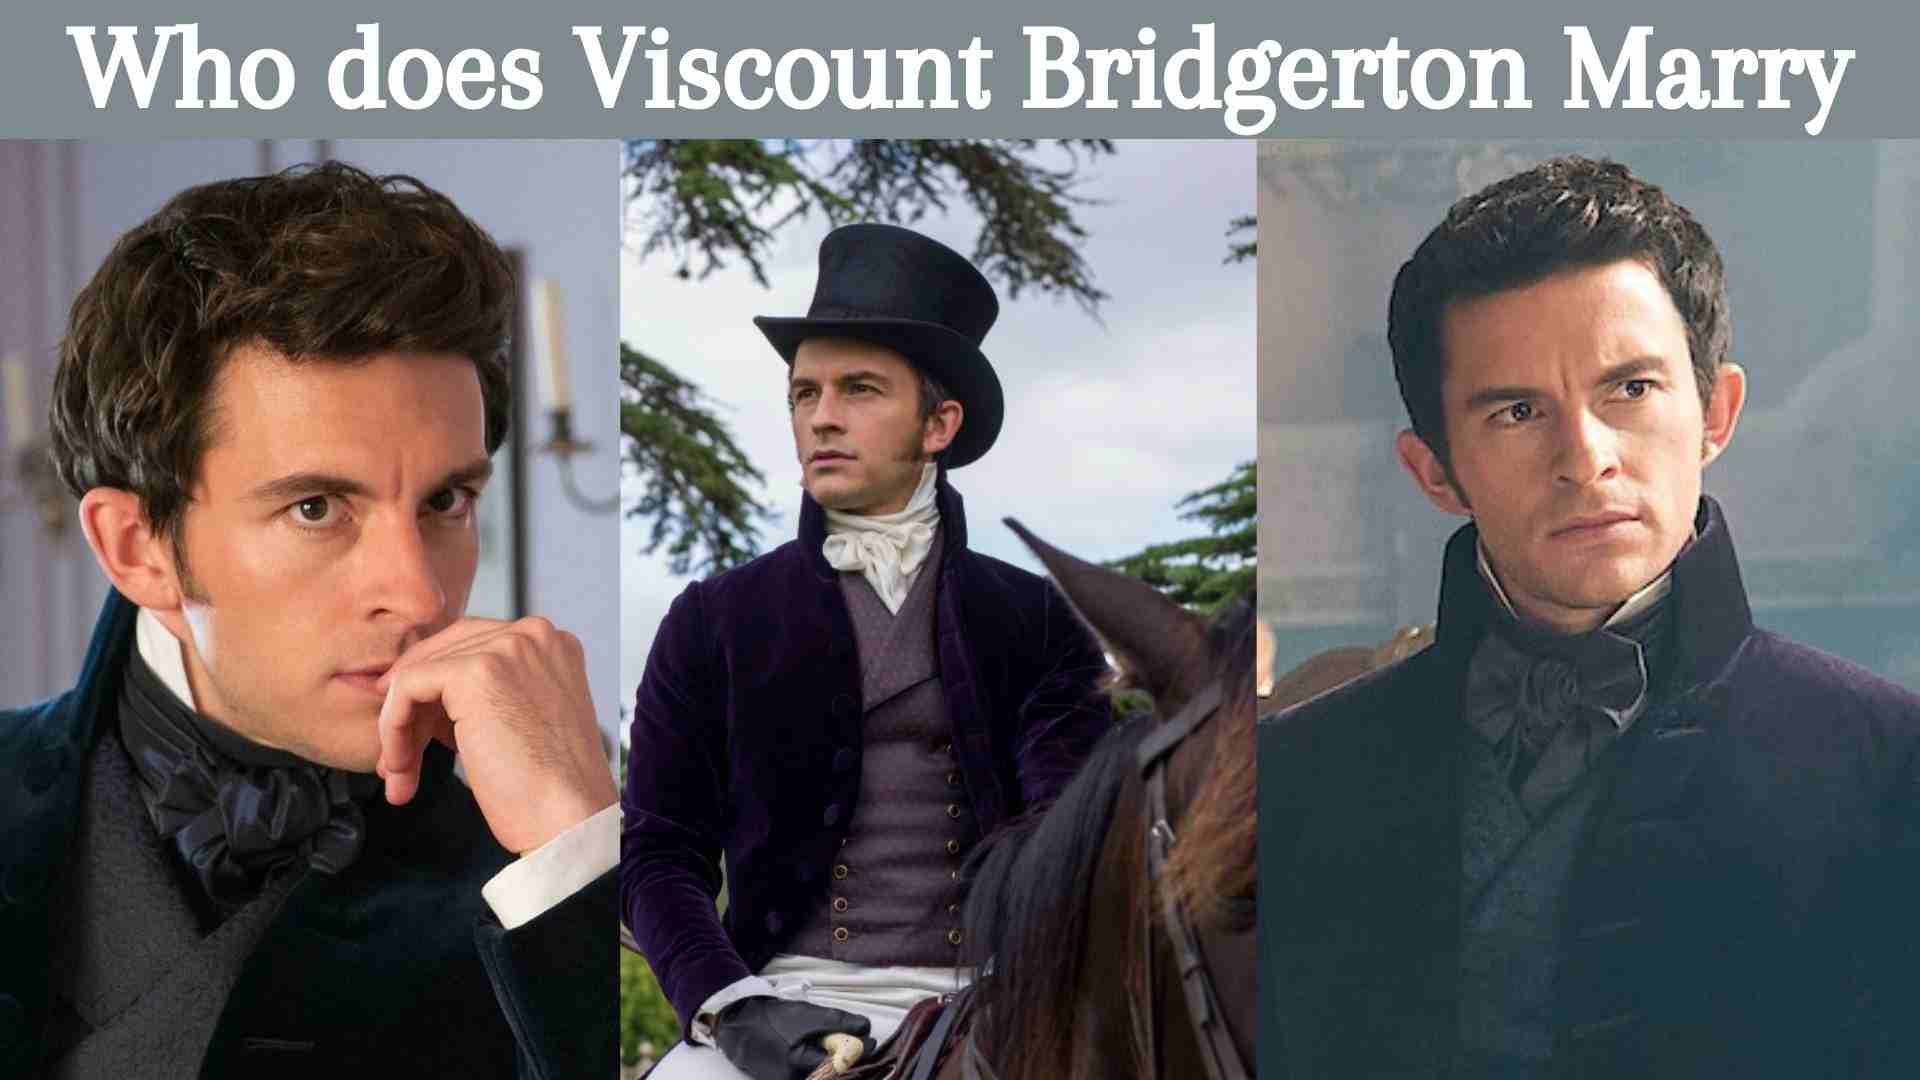 Who does Viscount Bridgerton Marry Wallpaper and images